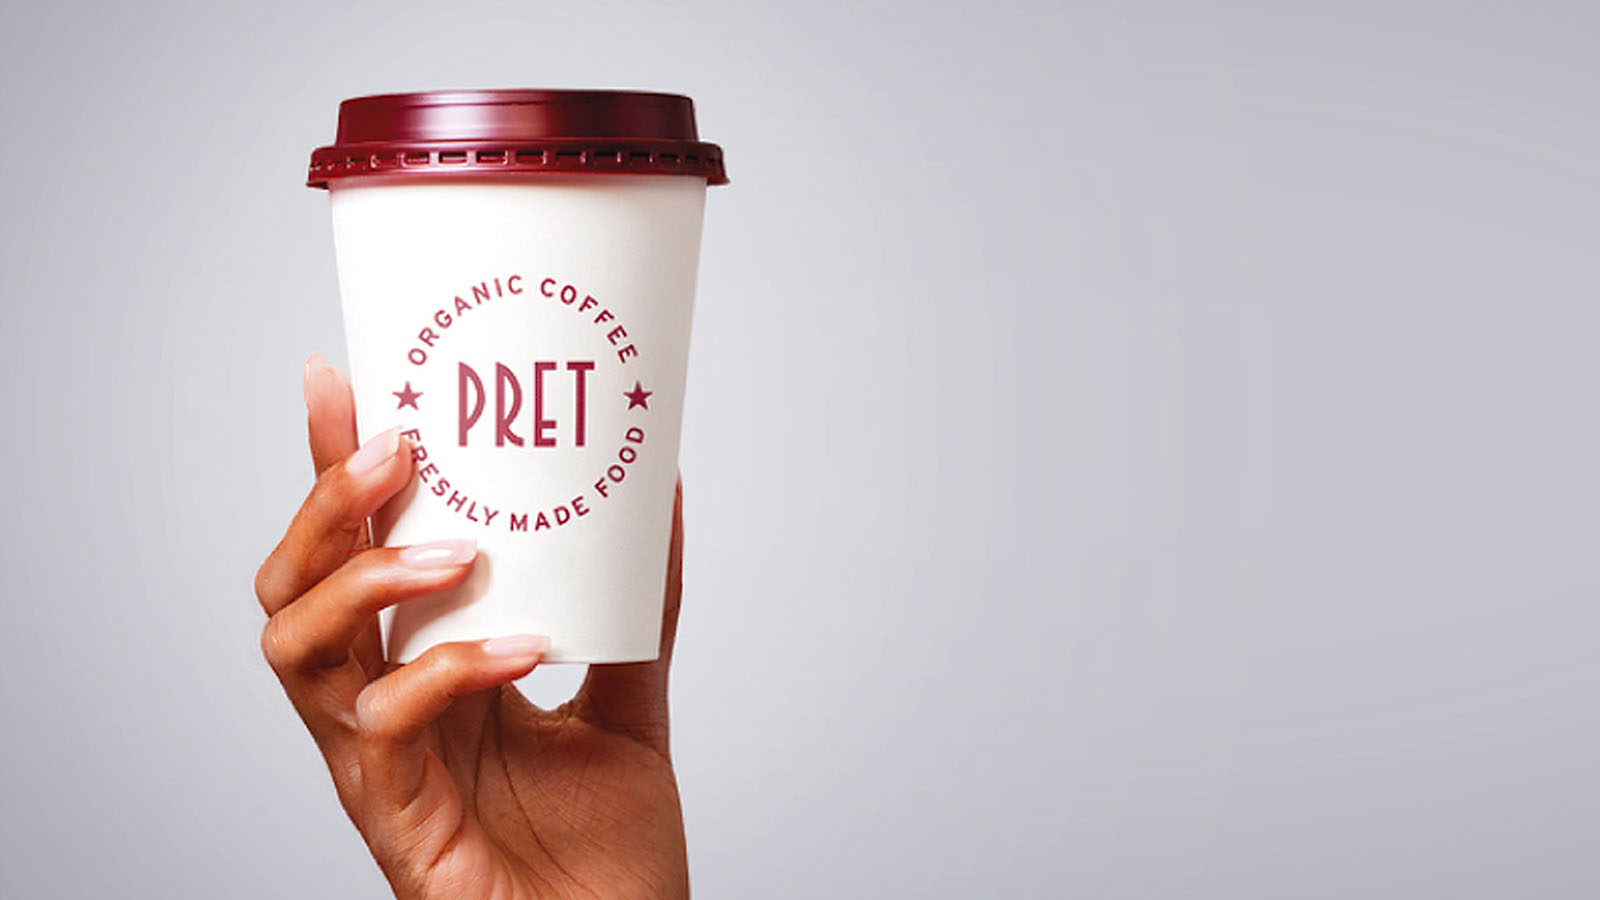 Eagle Eye powers Pret A Manger's pioneering in-shop coffee subscription launch